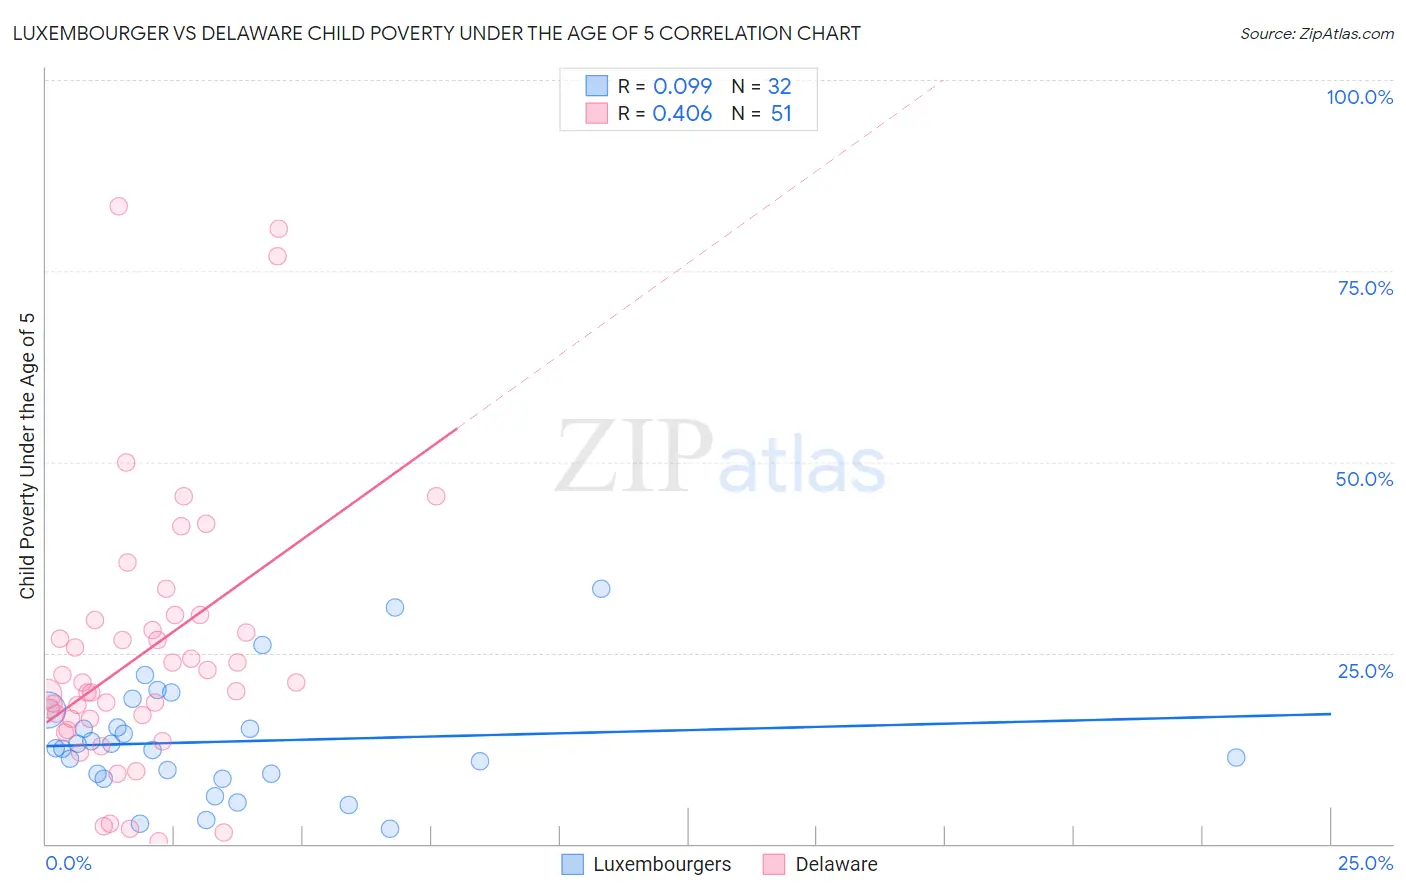 Luxembourger vs Delaware Child Poverty Under the Age of 5